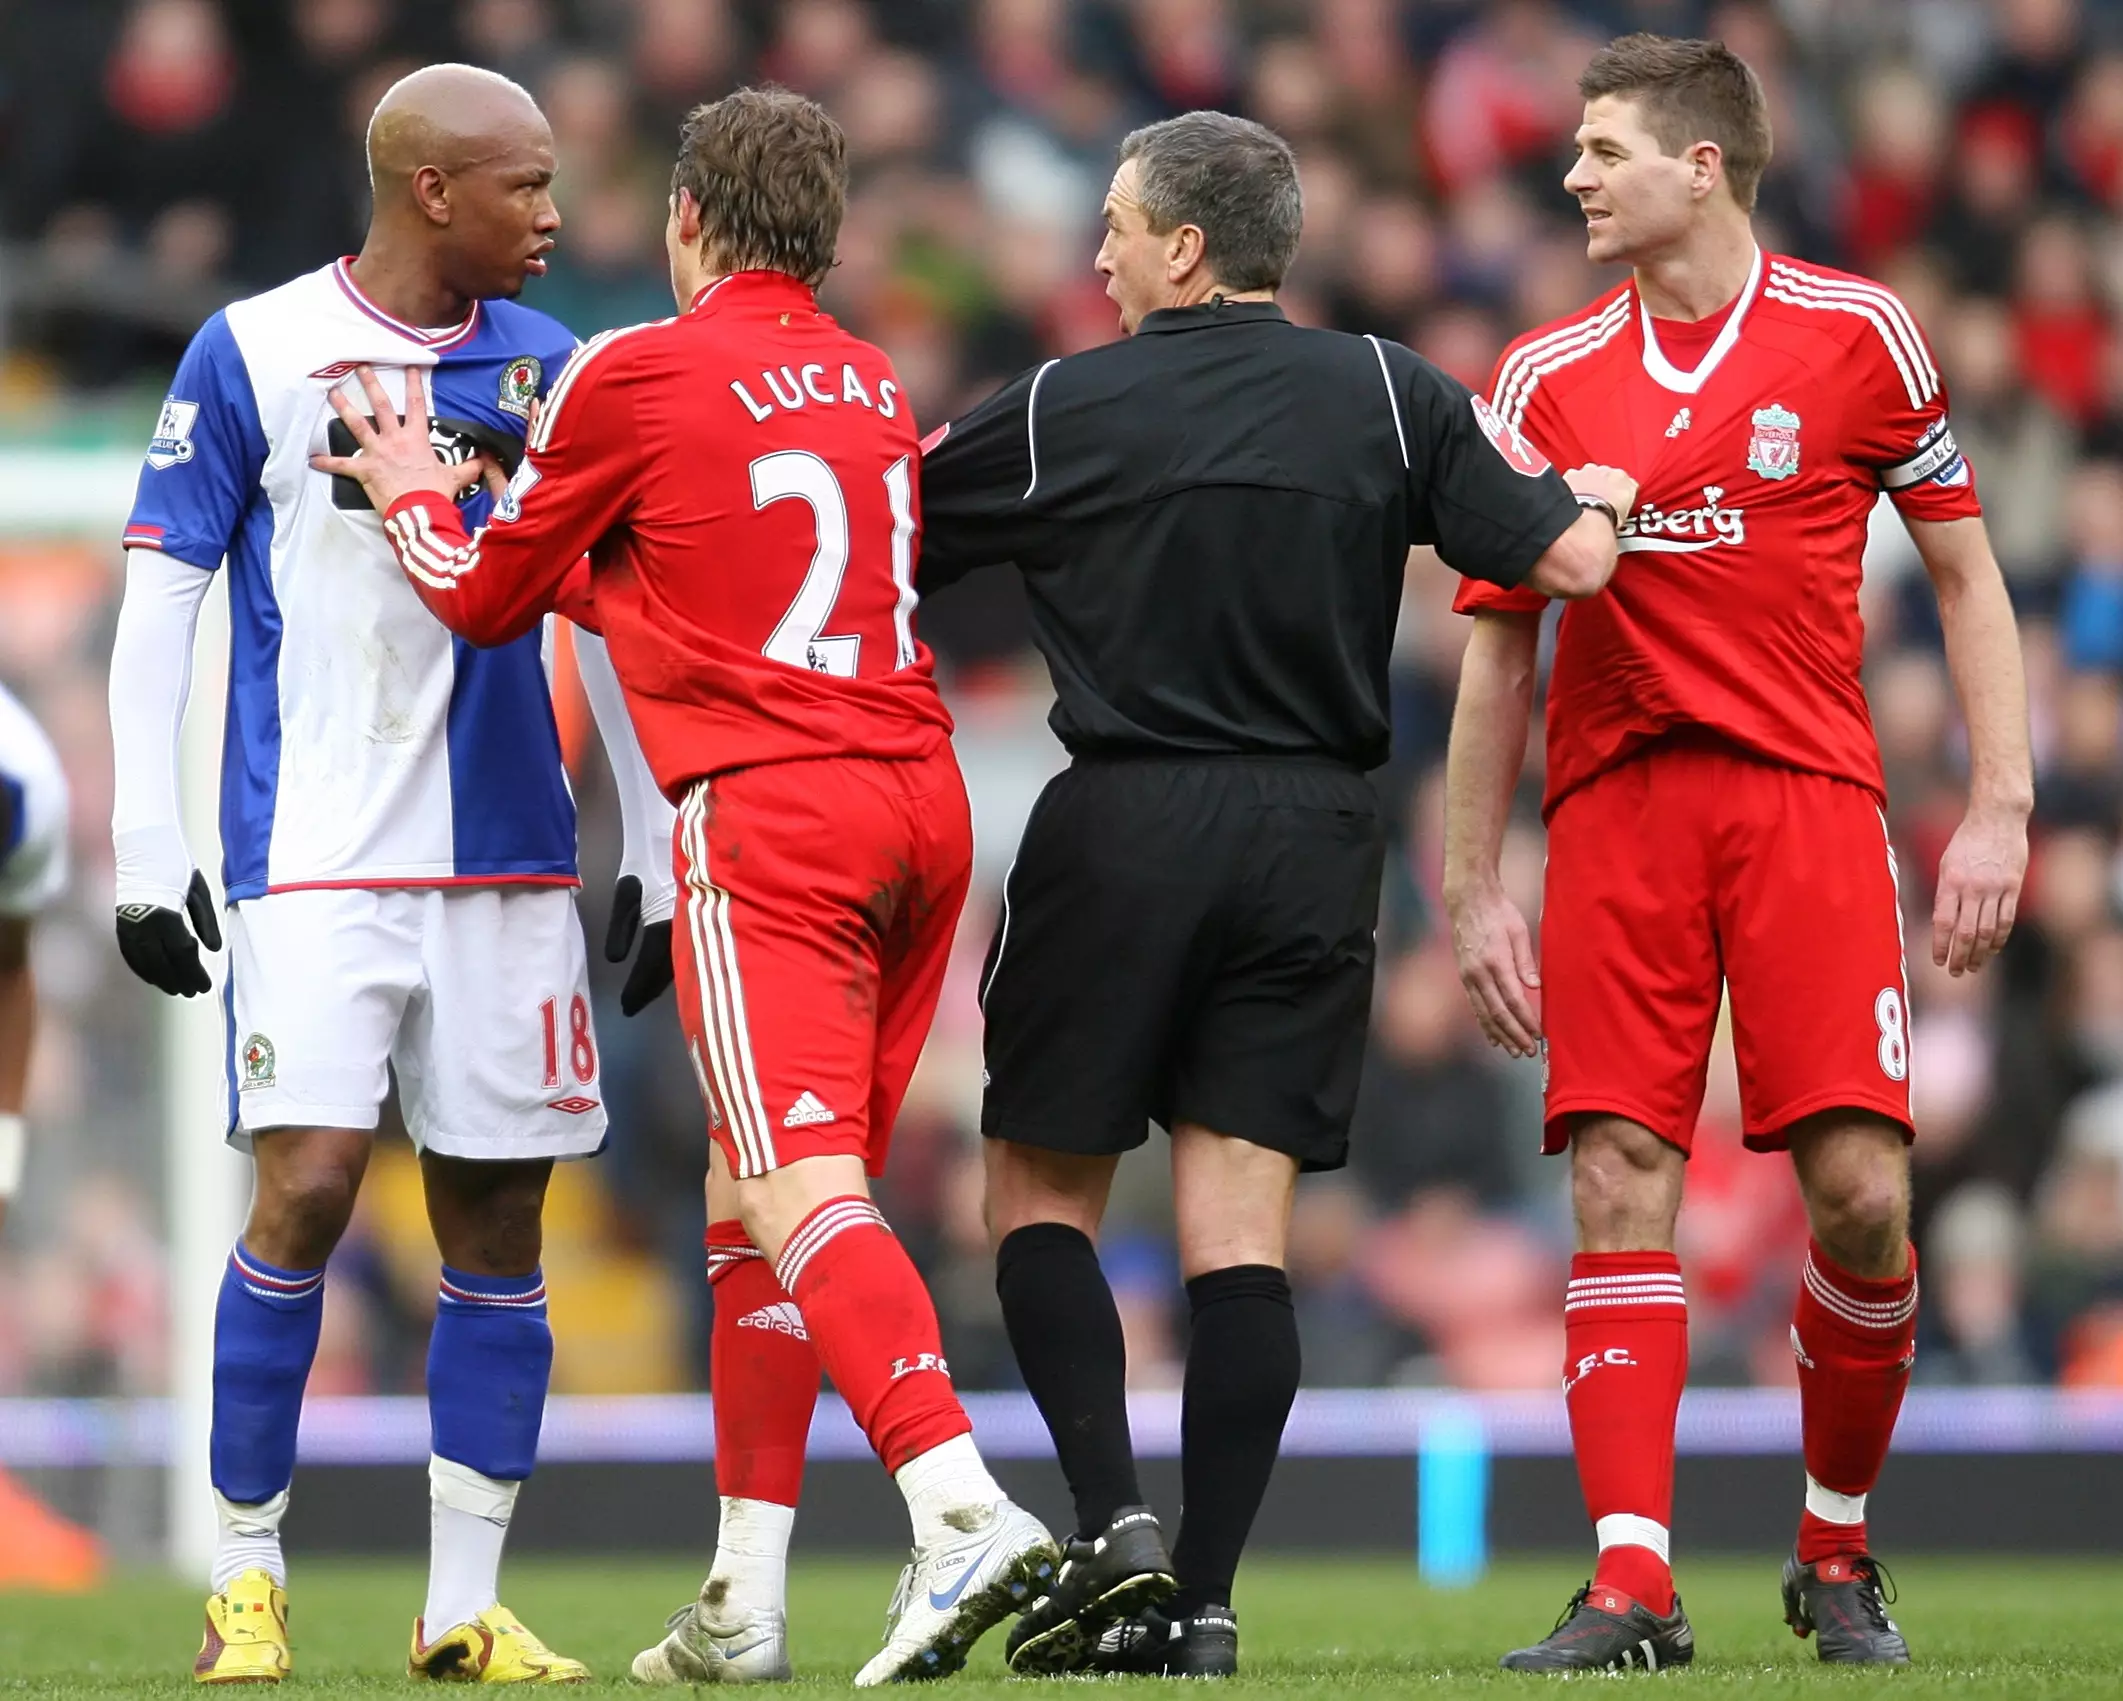 El Hadji Diouf's Comments About Steven Gerrard Retiring Have Sparked Outrage 